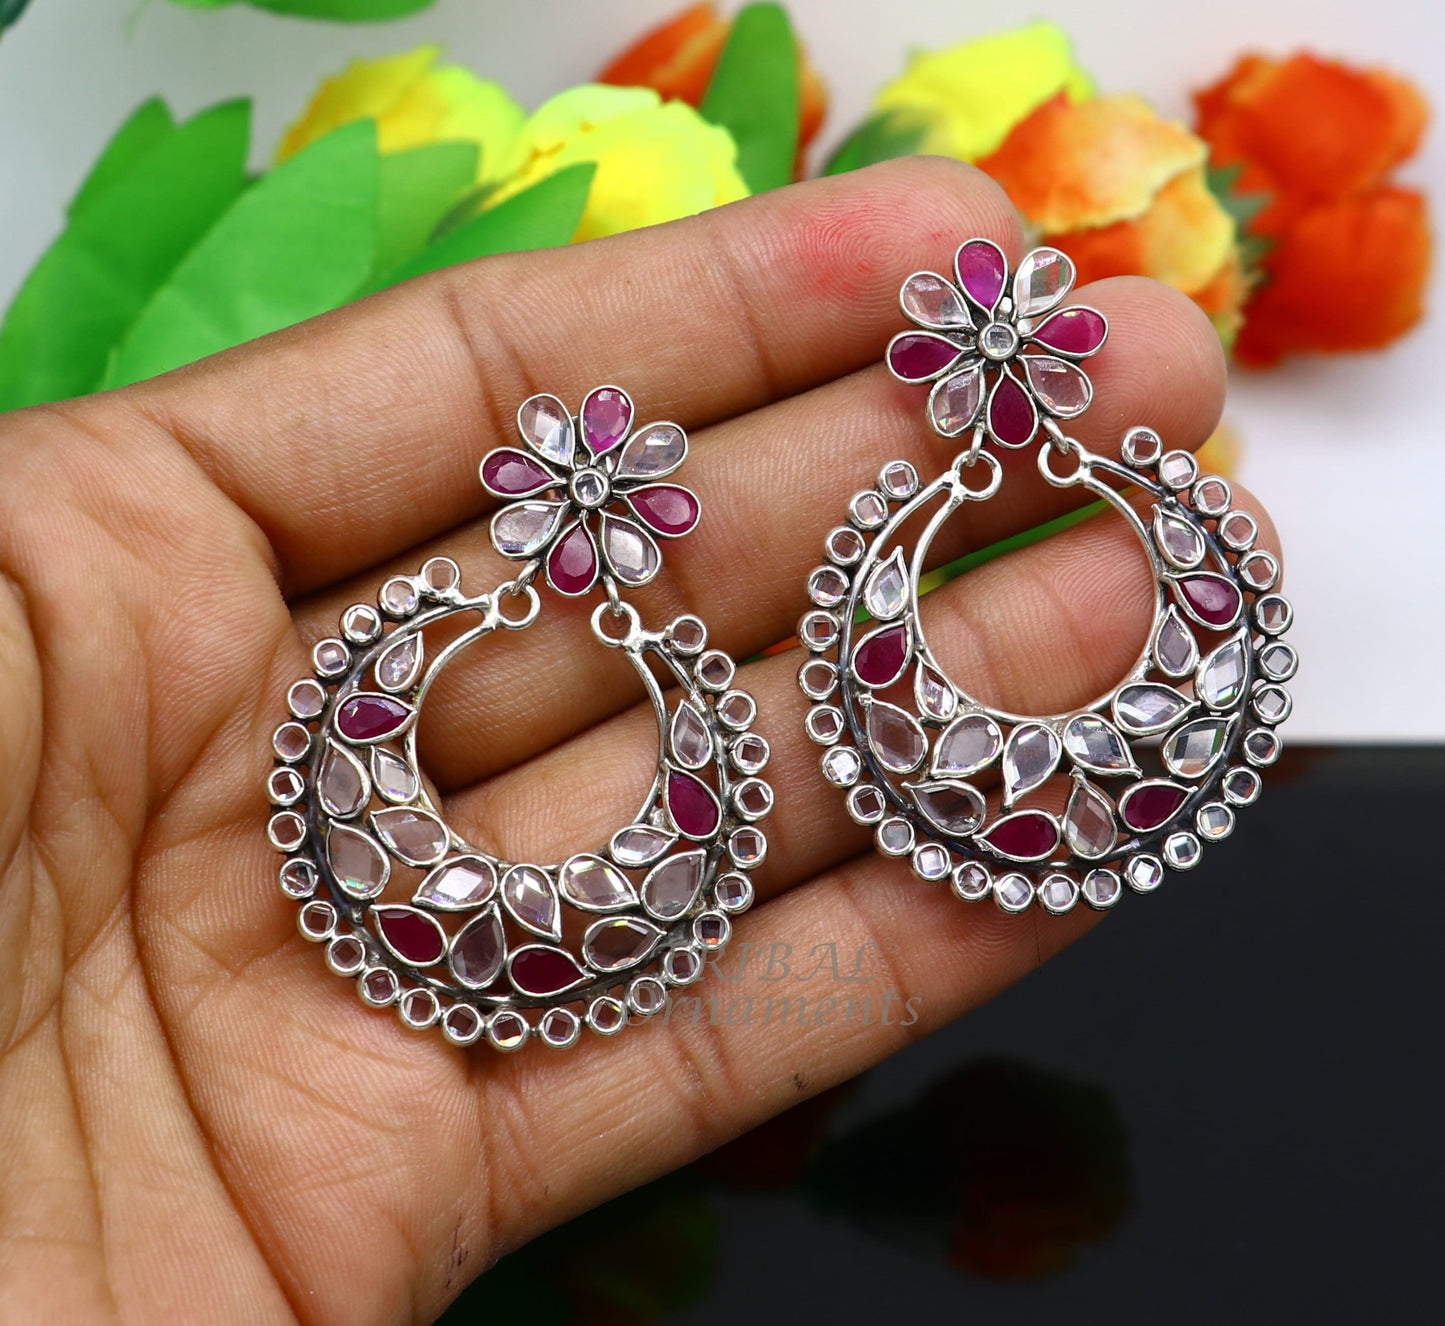 925 sterling silver handmade flower design stud earring amazing crystal polki cut stone ethnic tribal belly dance jewelry best gifts s1092 - TRIBAL ORNAMENTS